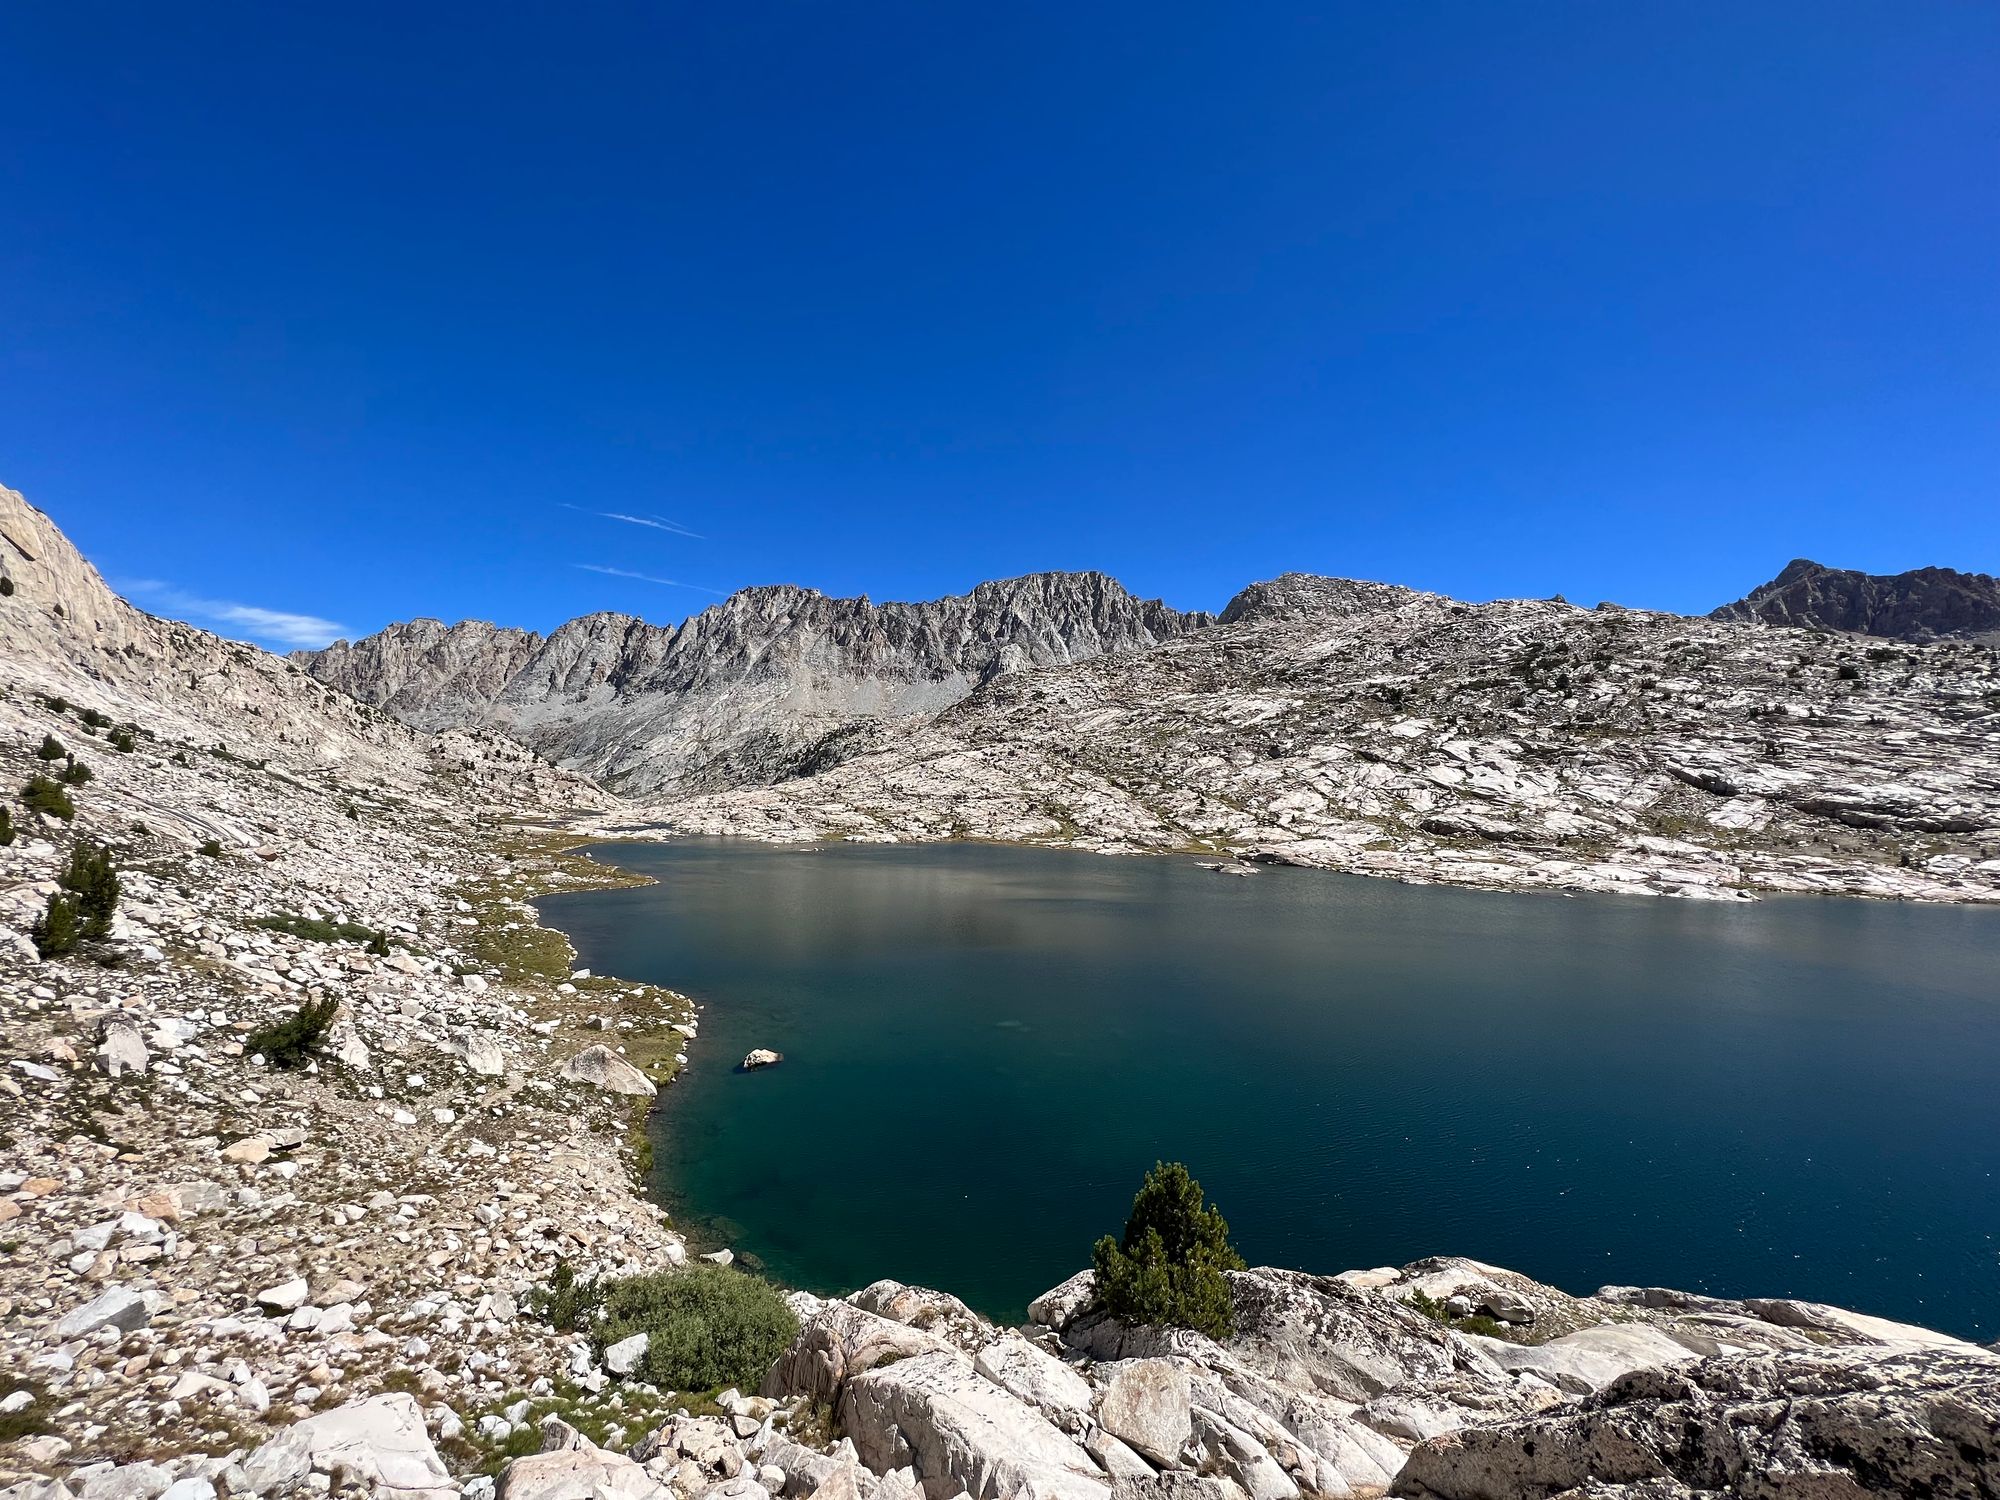 A deep-blue lake surrounded by granite.